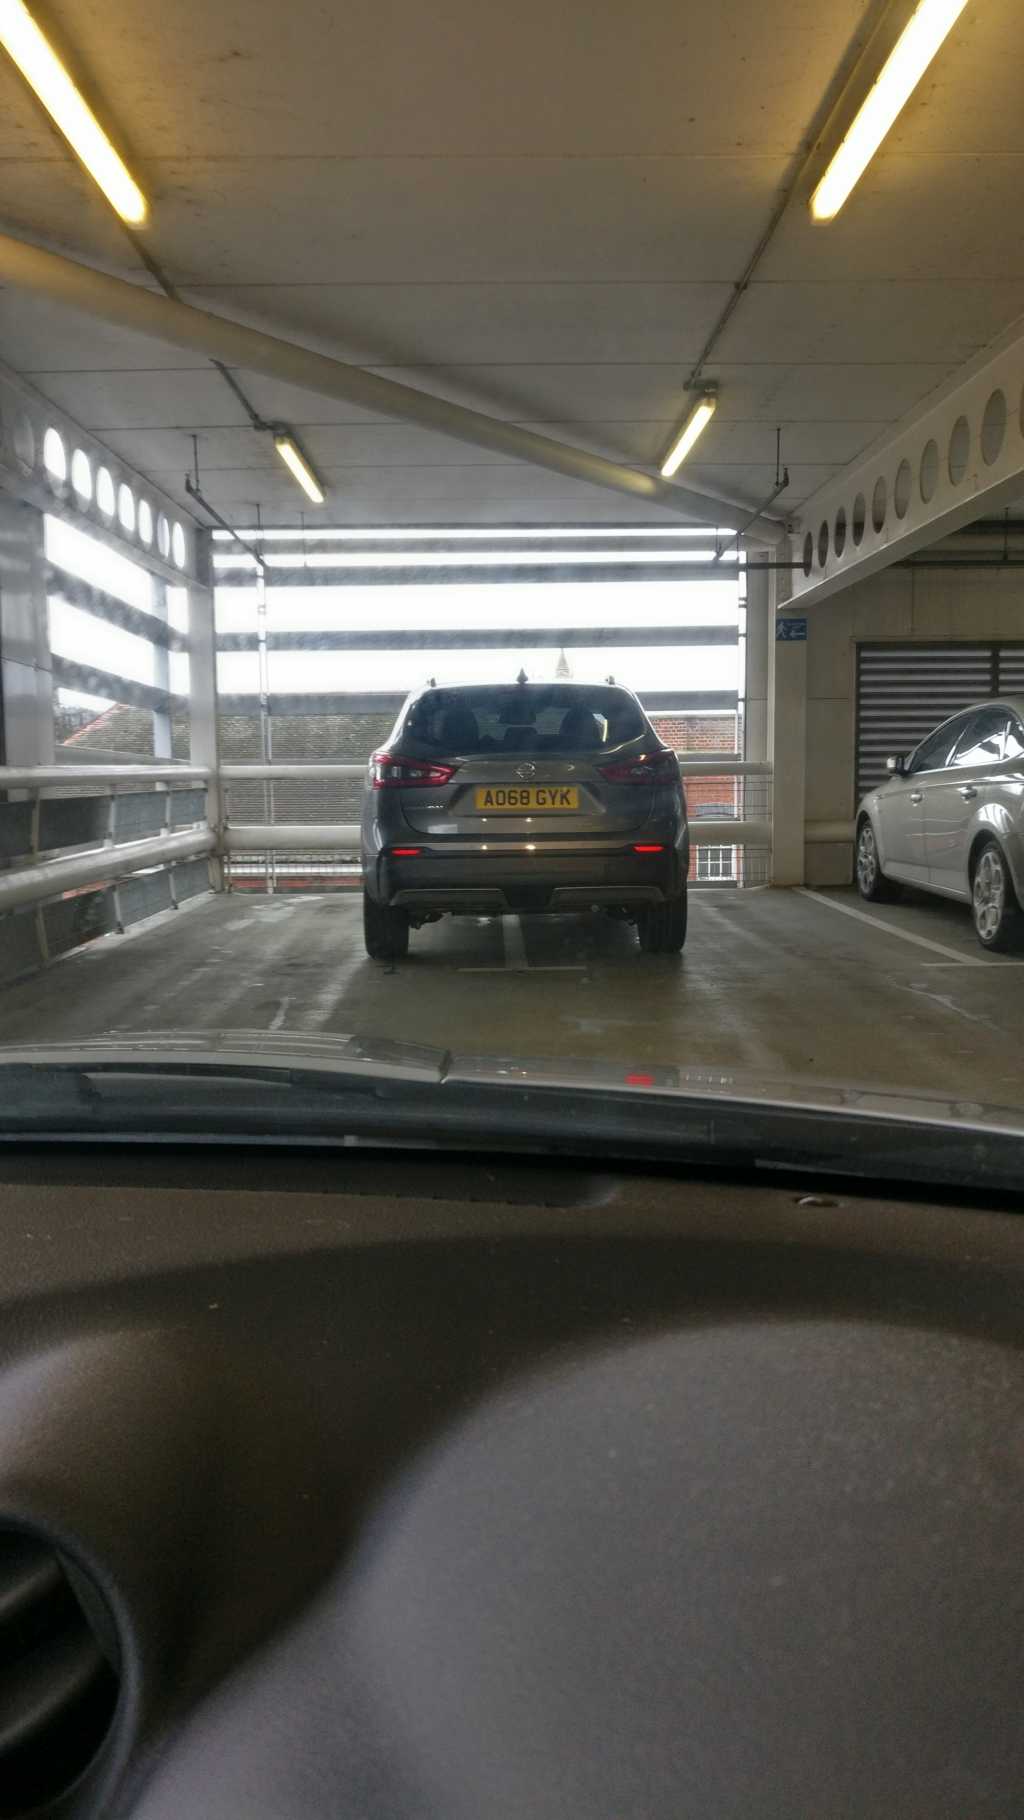 Selfish Parker WHEN A CAR PARK IS LISTED FULL AND YOU TAKE TWO SPACES /></div>
            
                        
                <div class=